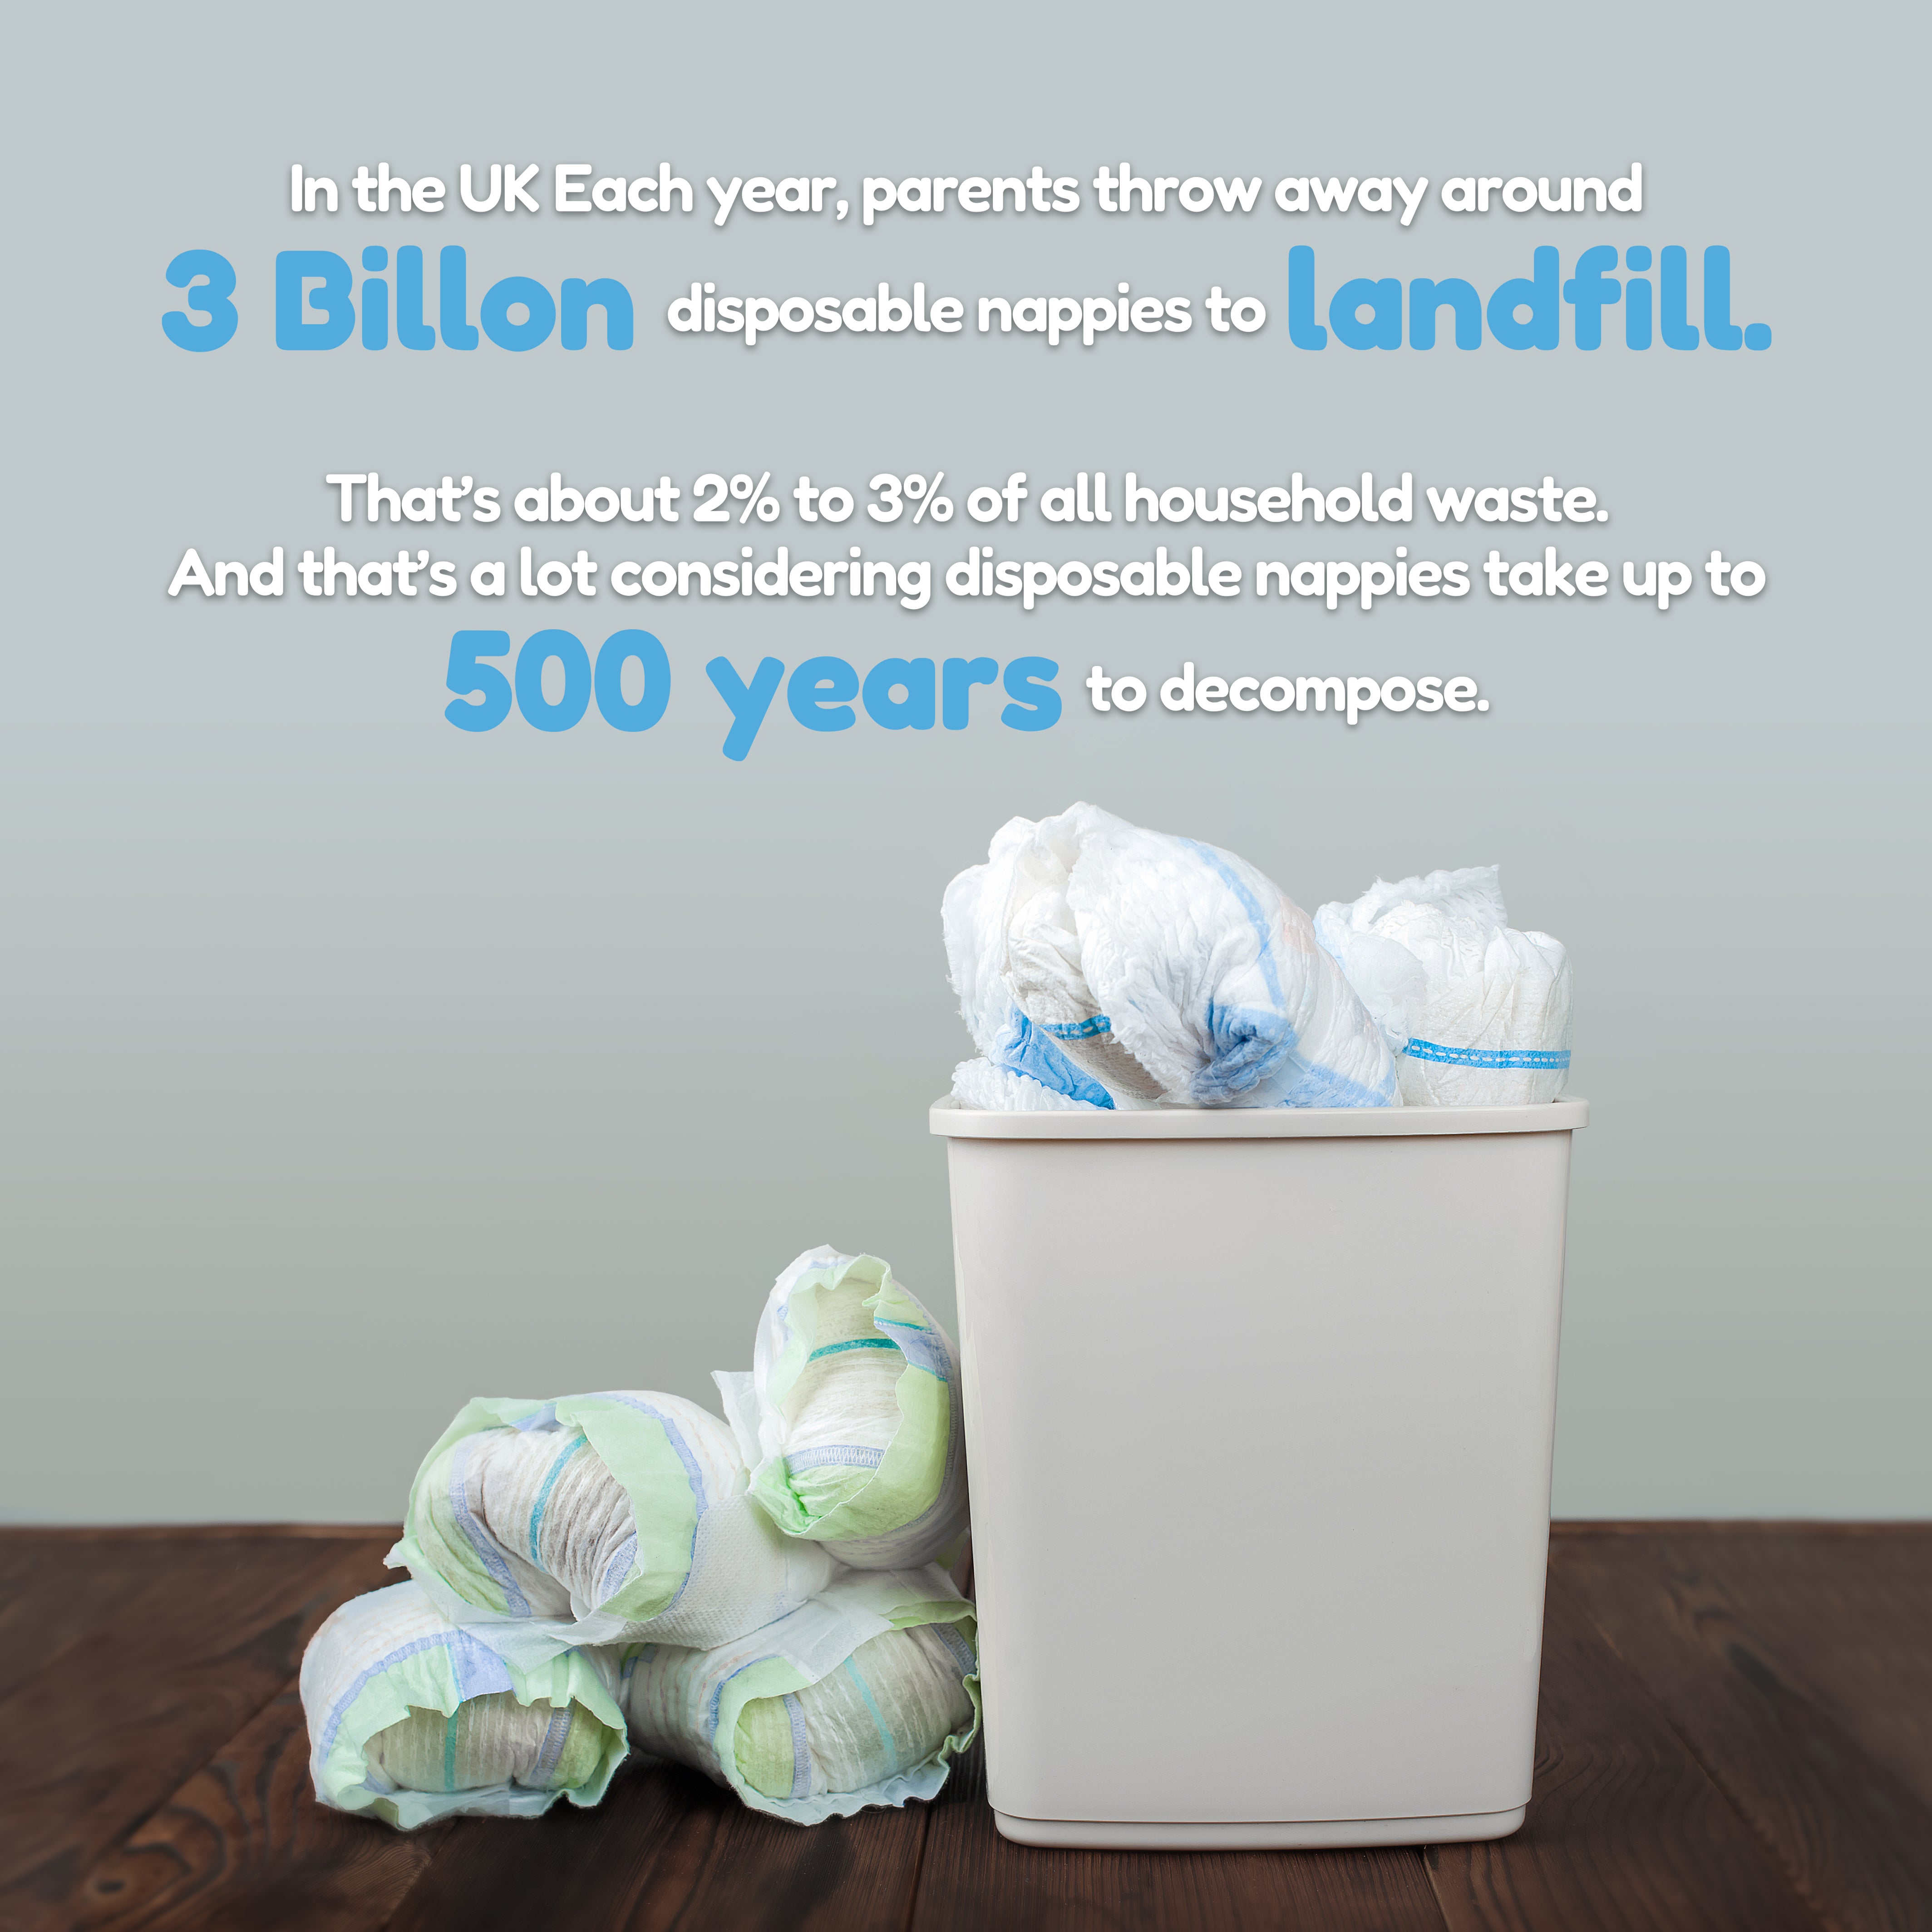 The facts on how harmful disposable nappies are